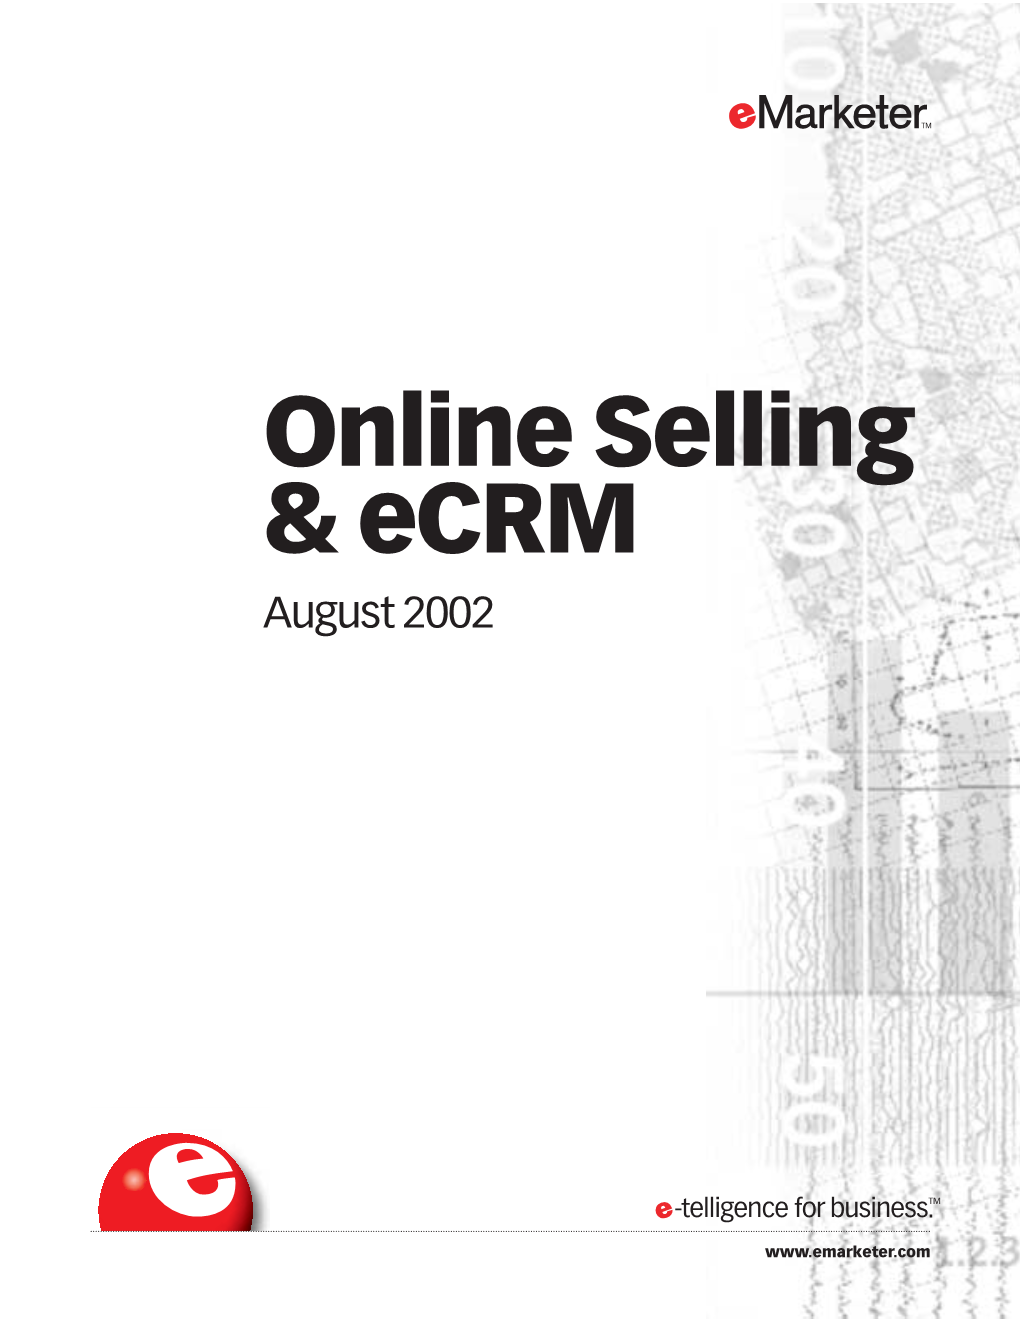 Online Selling & Ecrm August 2002